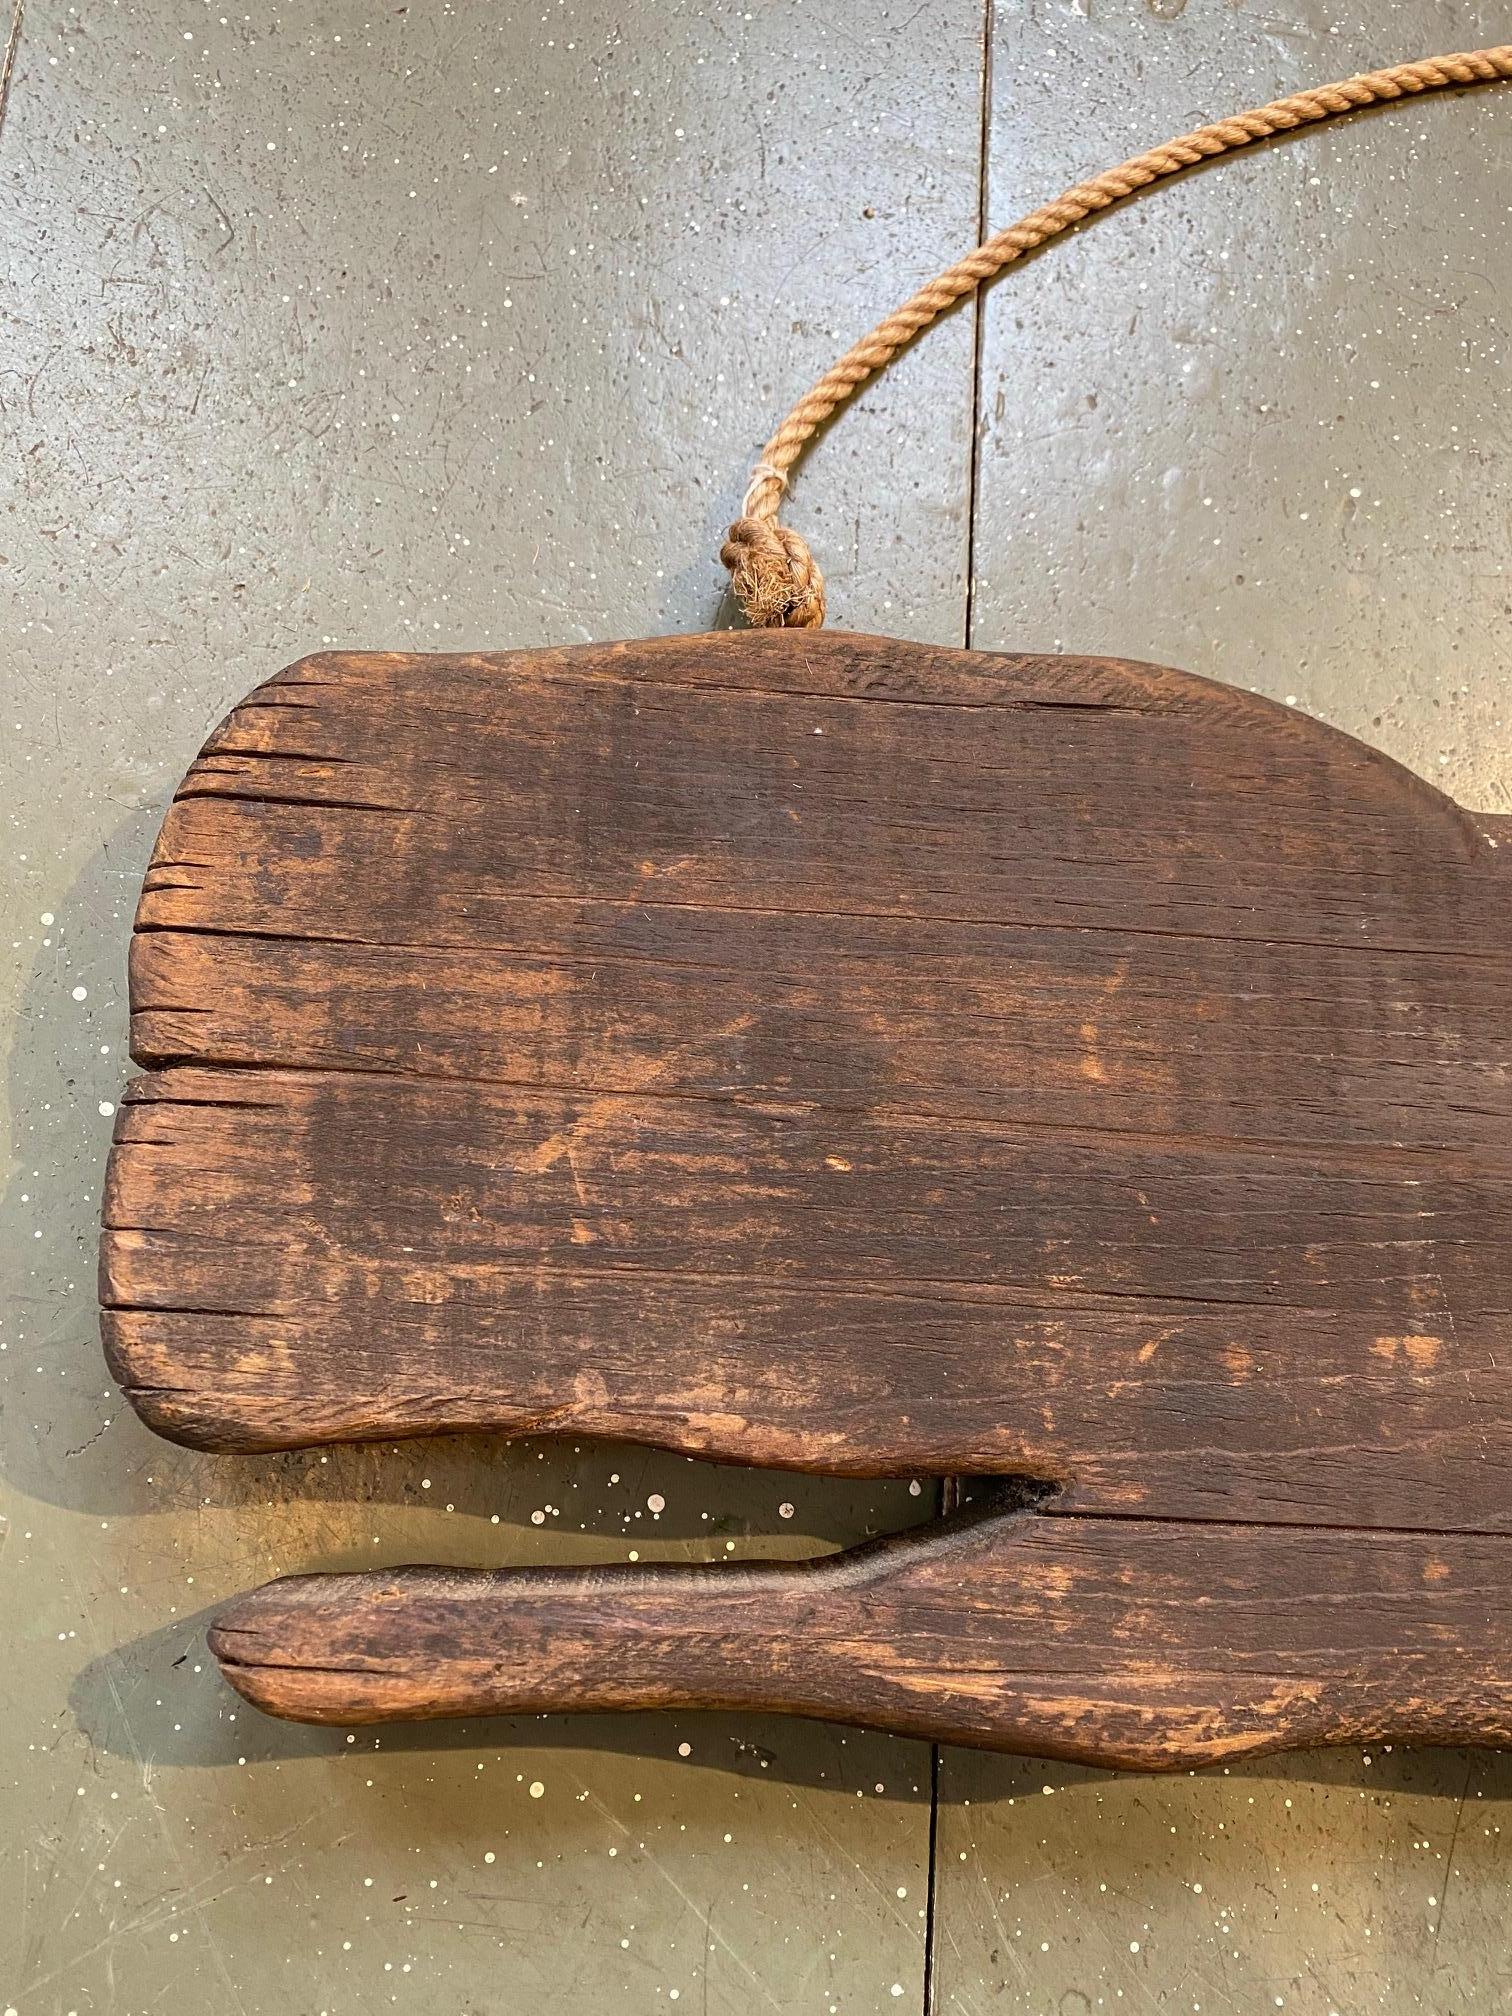 Early 20th century rustic carved wooden whale, circa 1910 or so, a rough hewn thick solid plank hand cut as a sperm whale with raised flukes and mouth agape. The tail in particular is well carved, albeit in a simple style, with good curves giving a